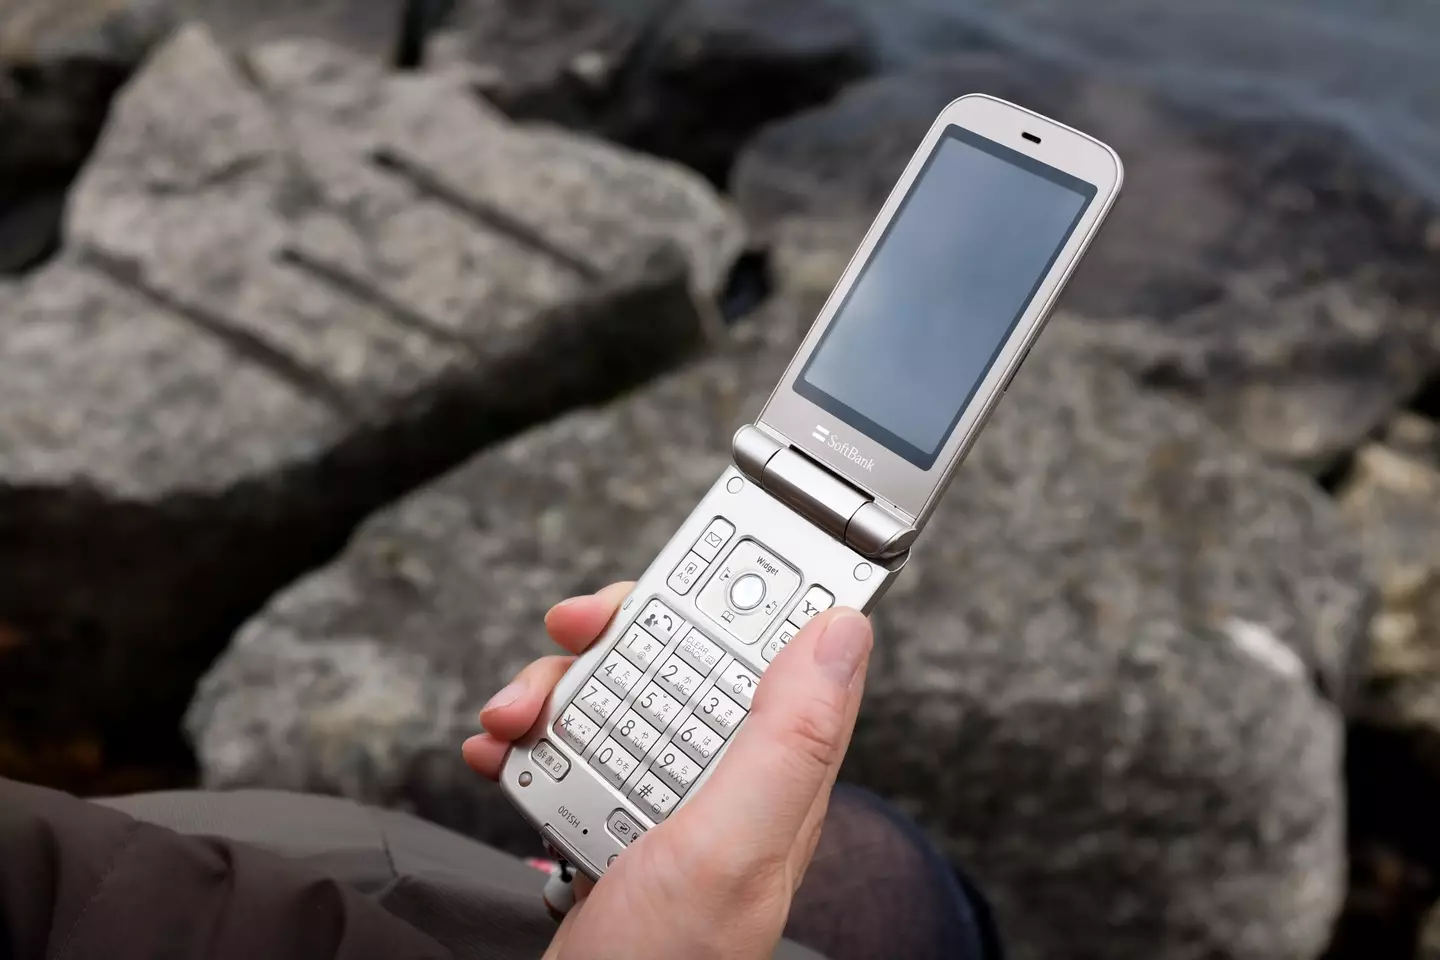 The iconic flip phone model has had a totally modern makeover.